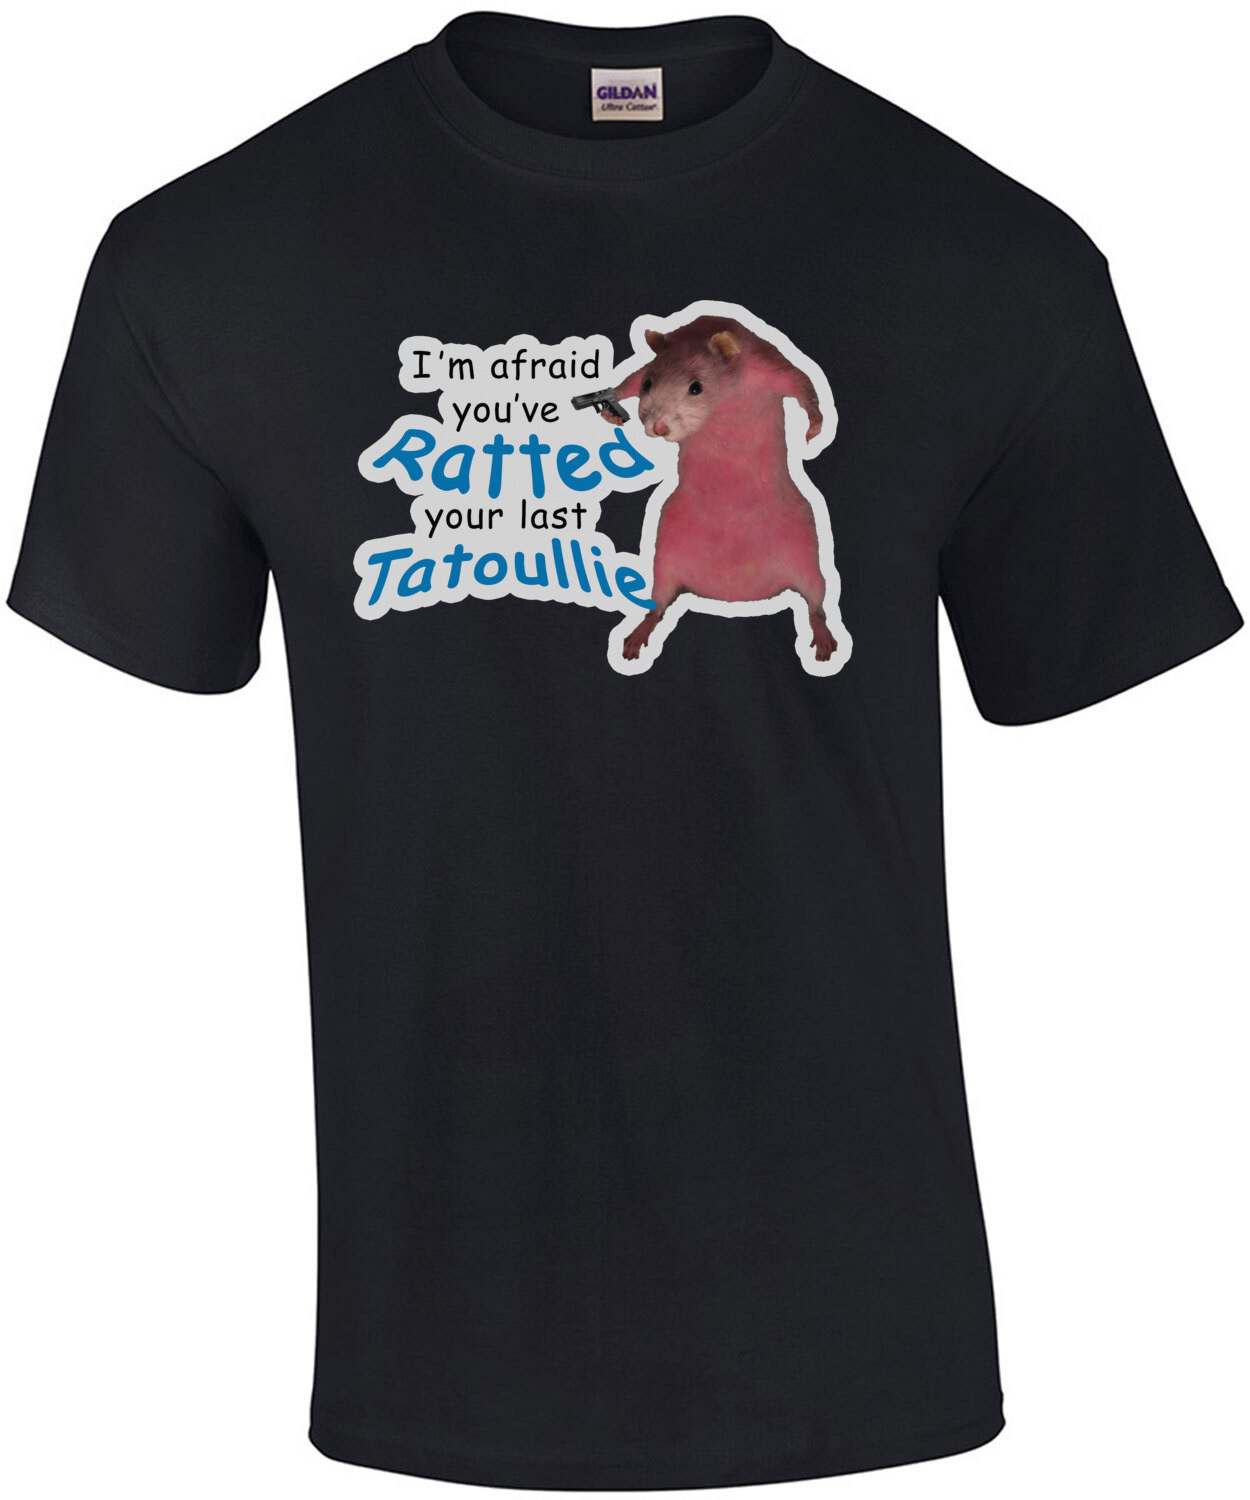 I'm afraid you've ratted your last tatoullie. Funny T-Shirt